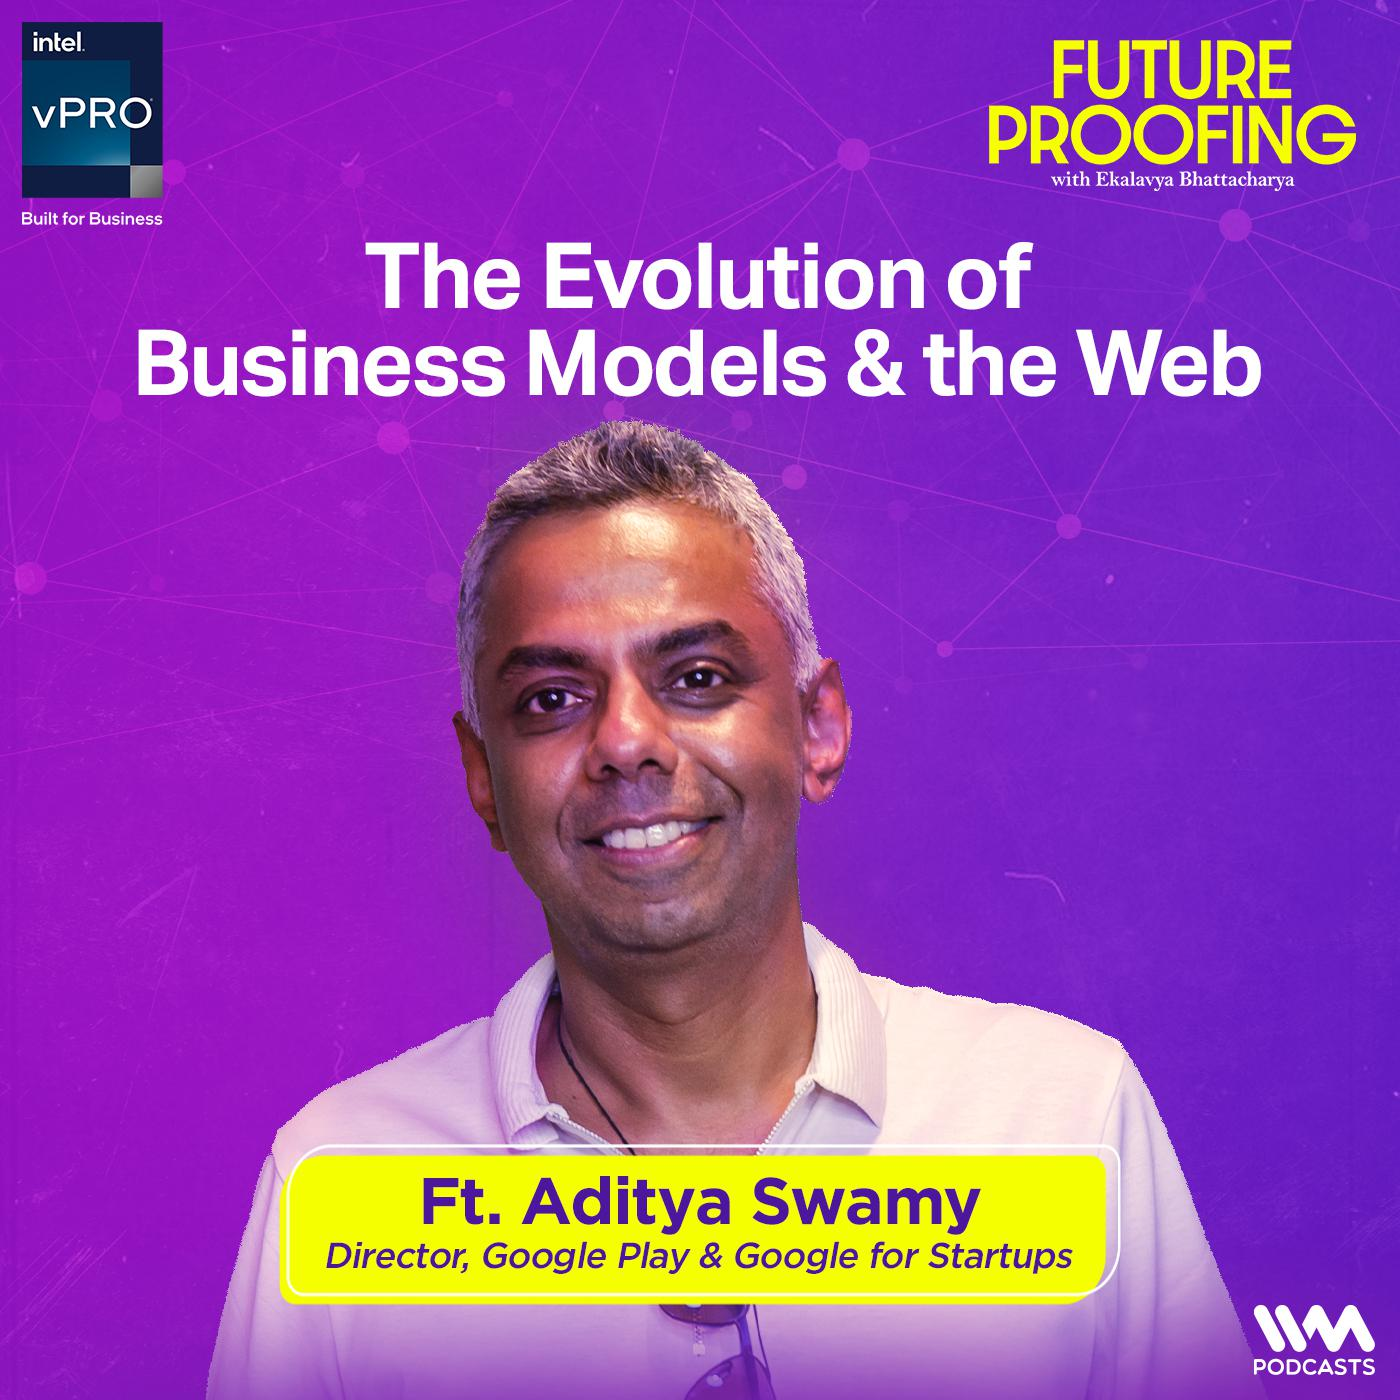 The Evolution of Business Models & the Web with Aditya Swamy